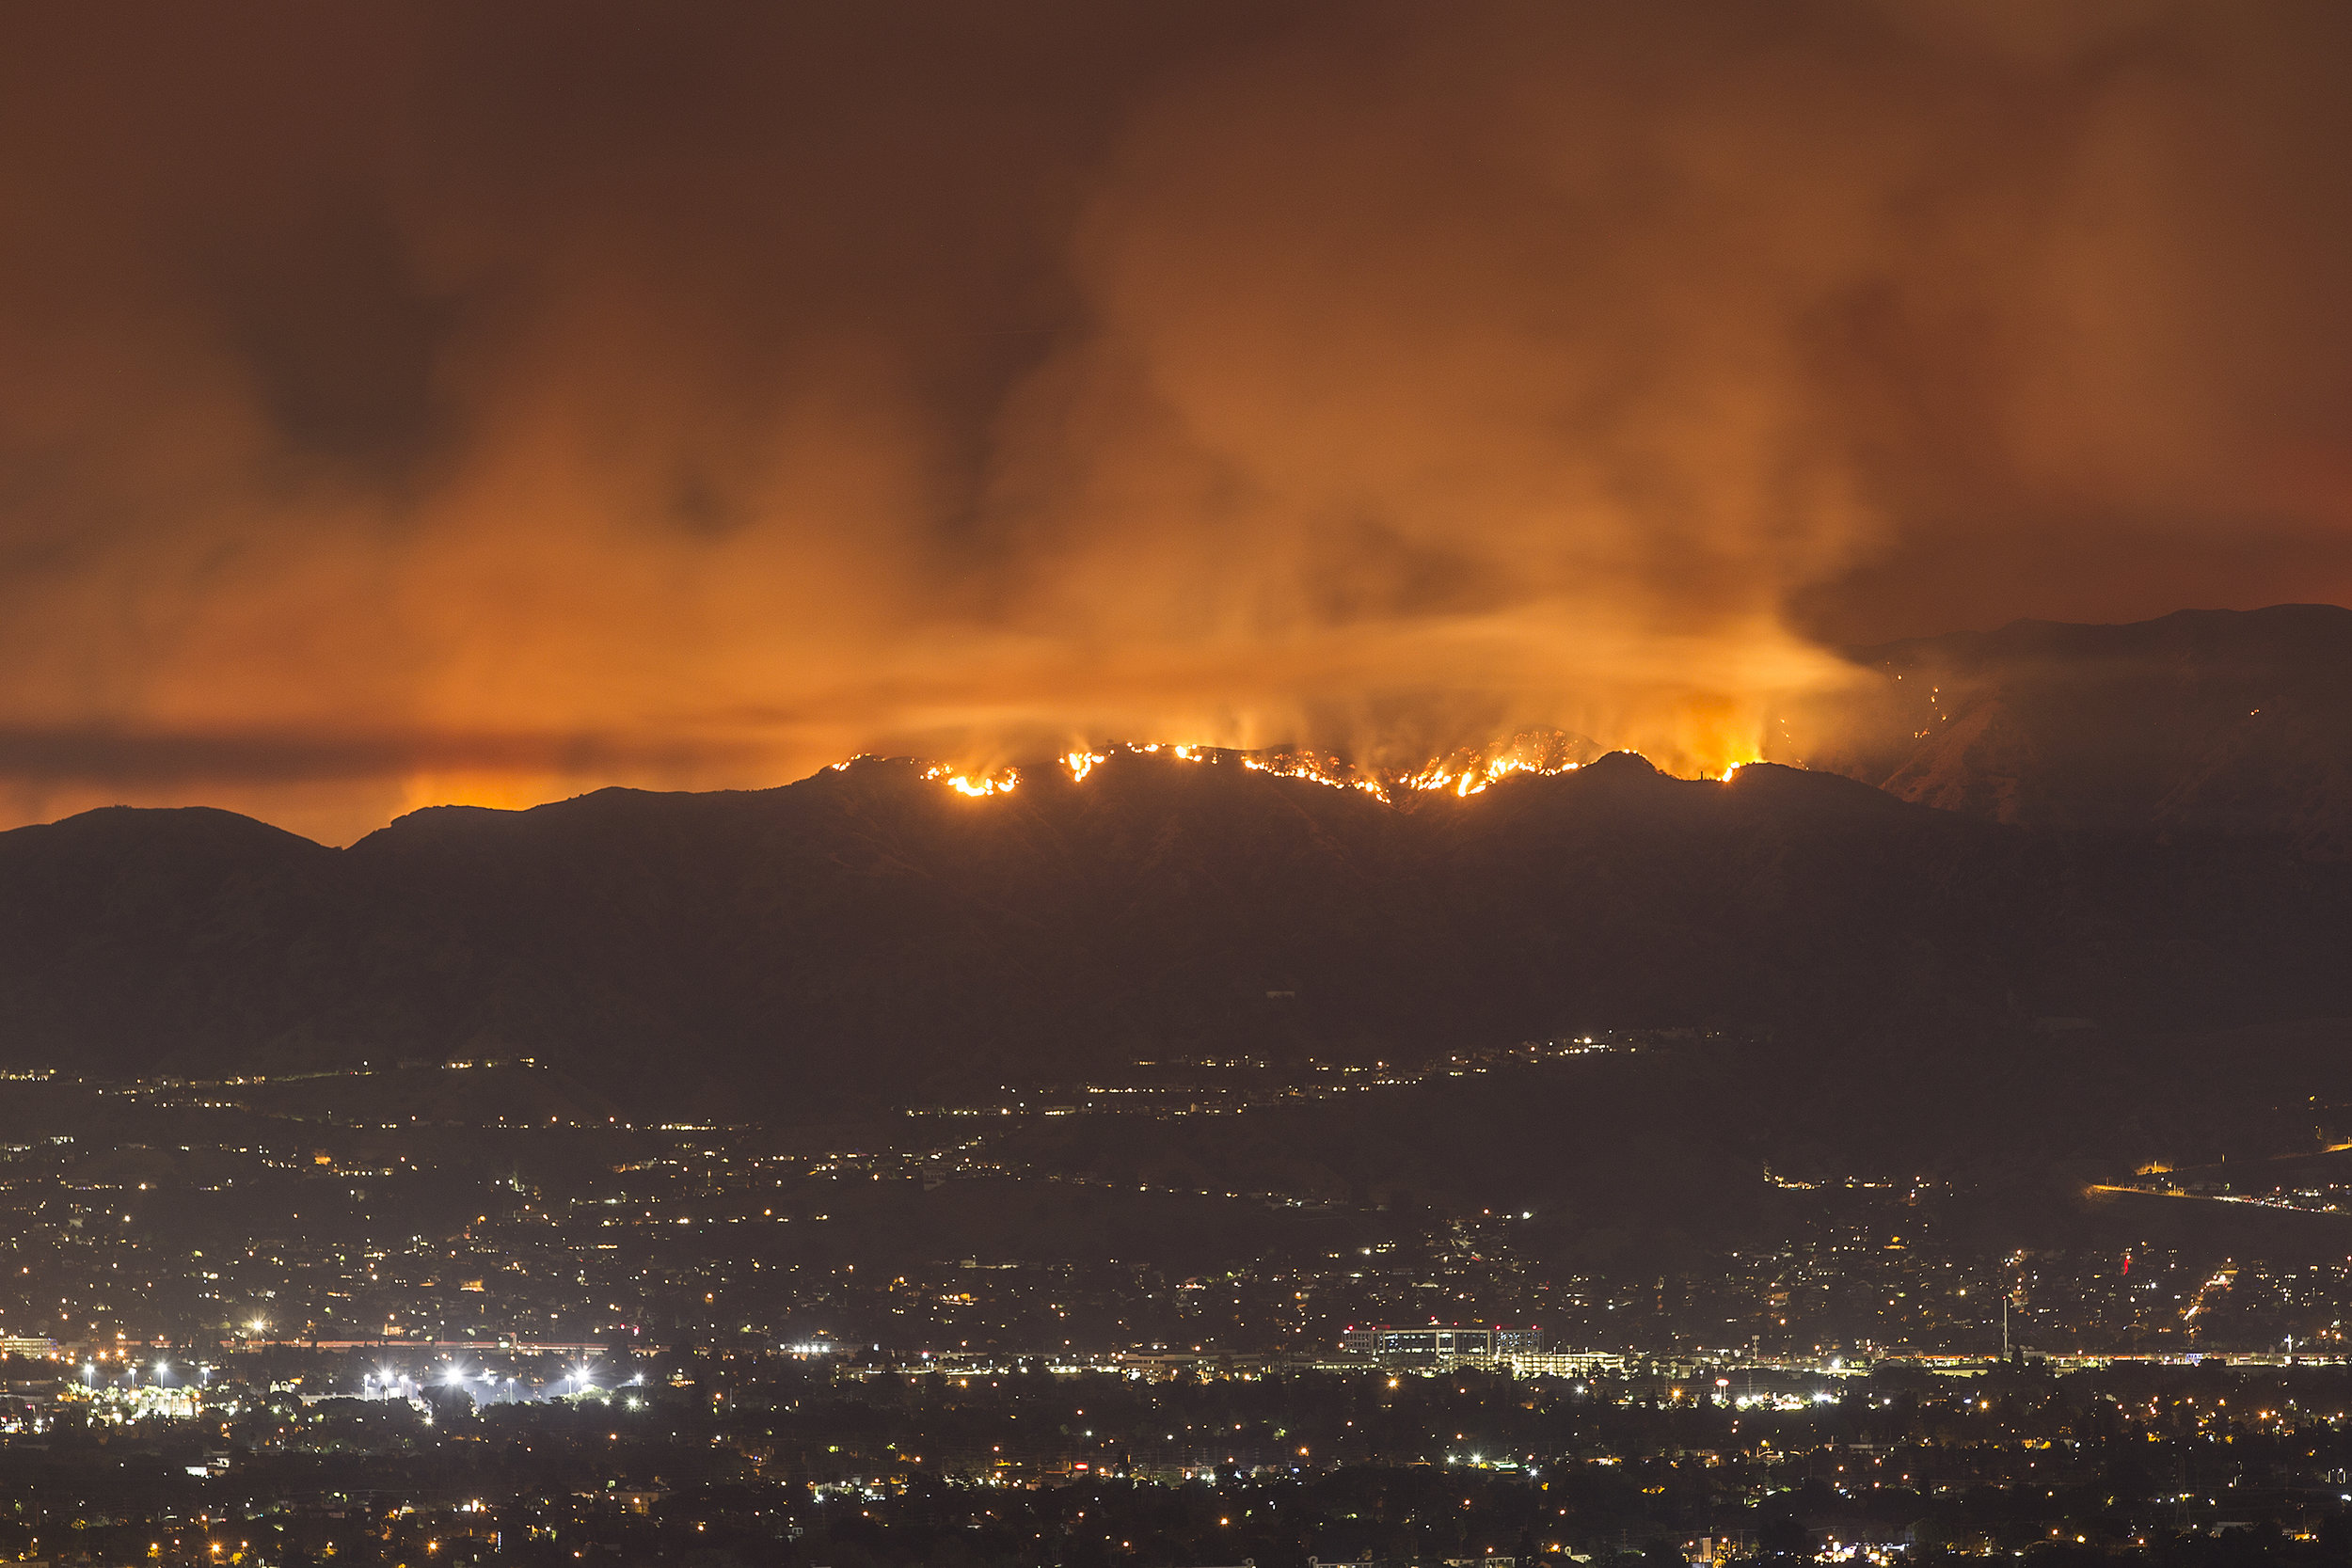 As Wildfires Rage In Forests Across The Globe, Sec. Bernhardt Prepares For Fire Season At Home